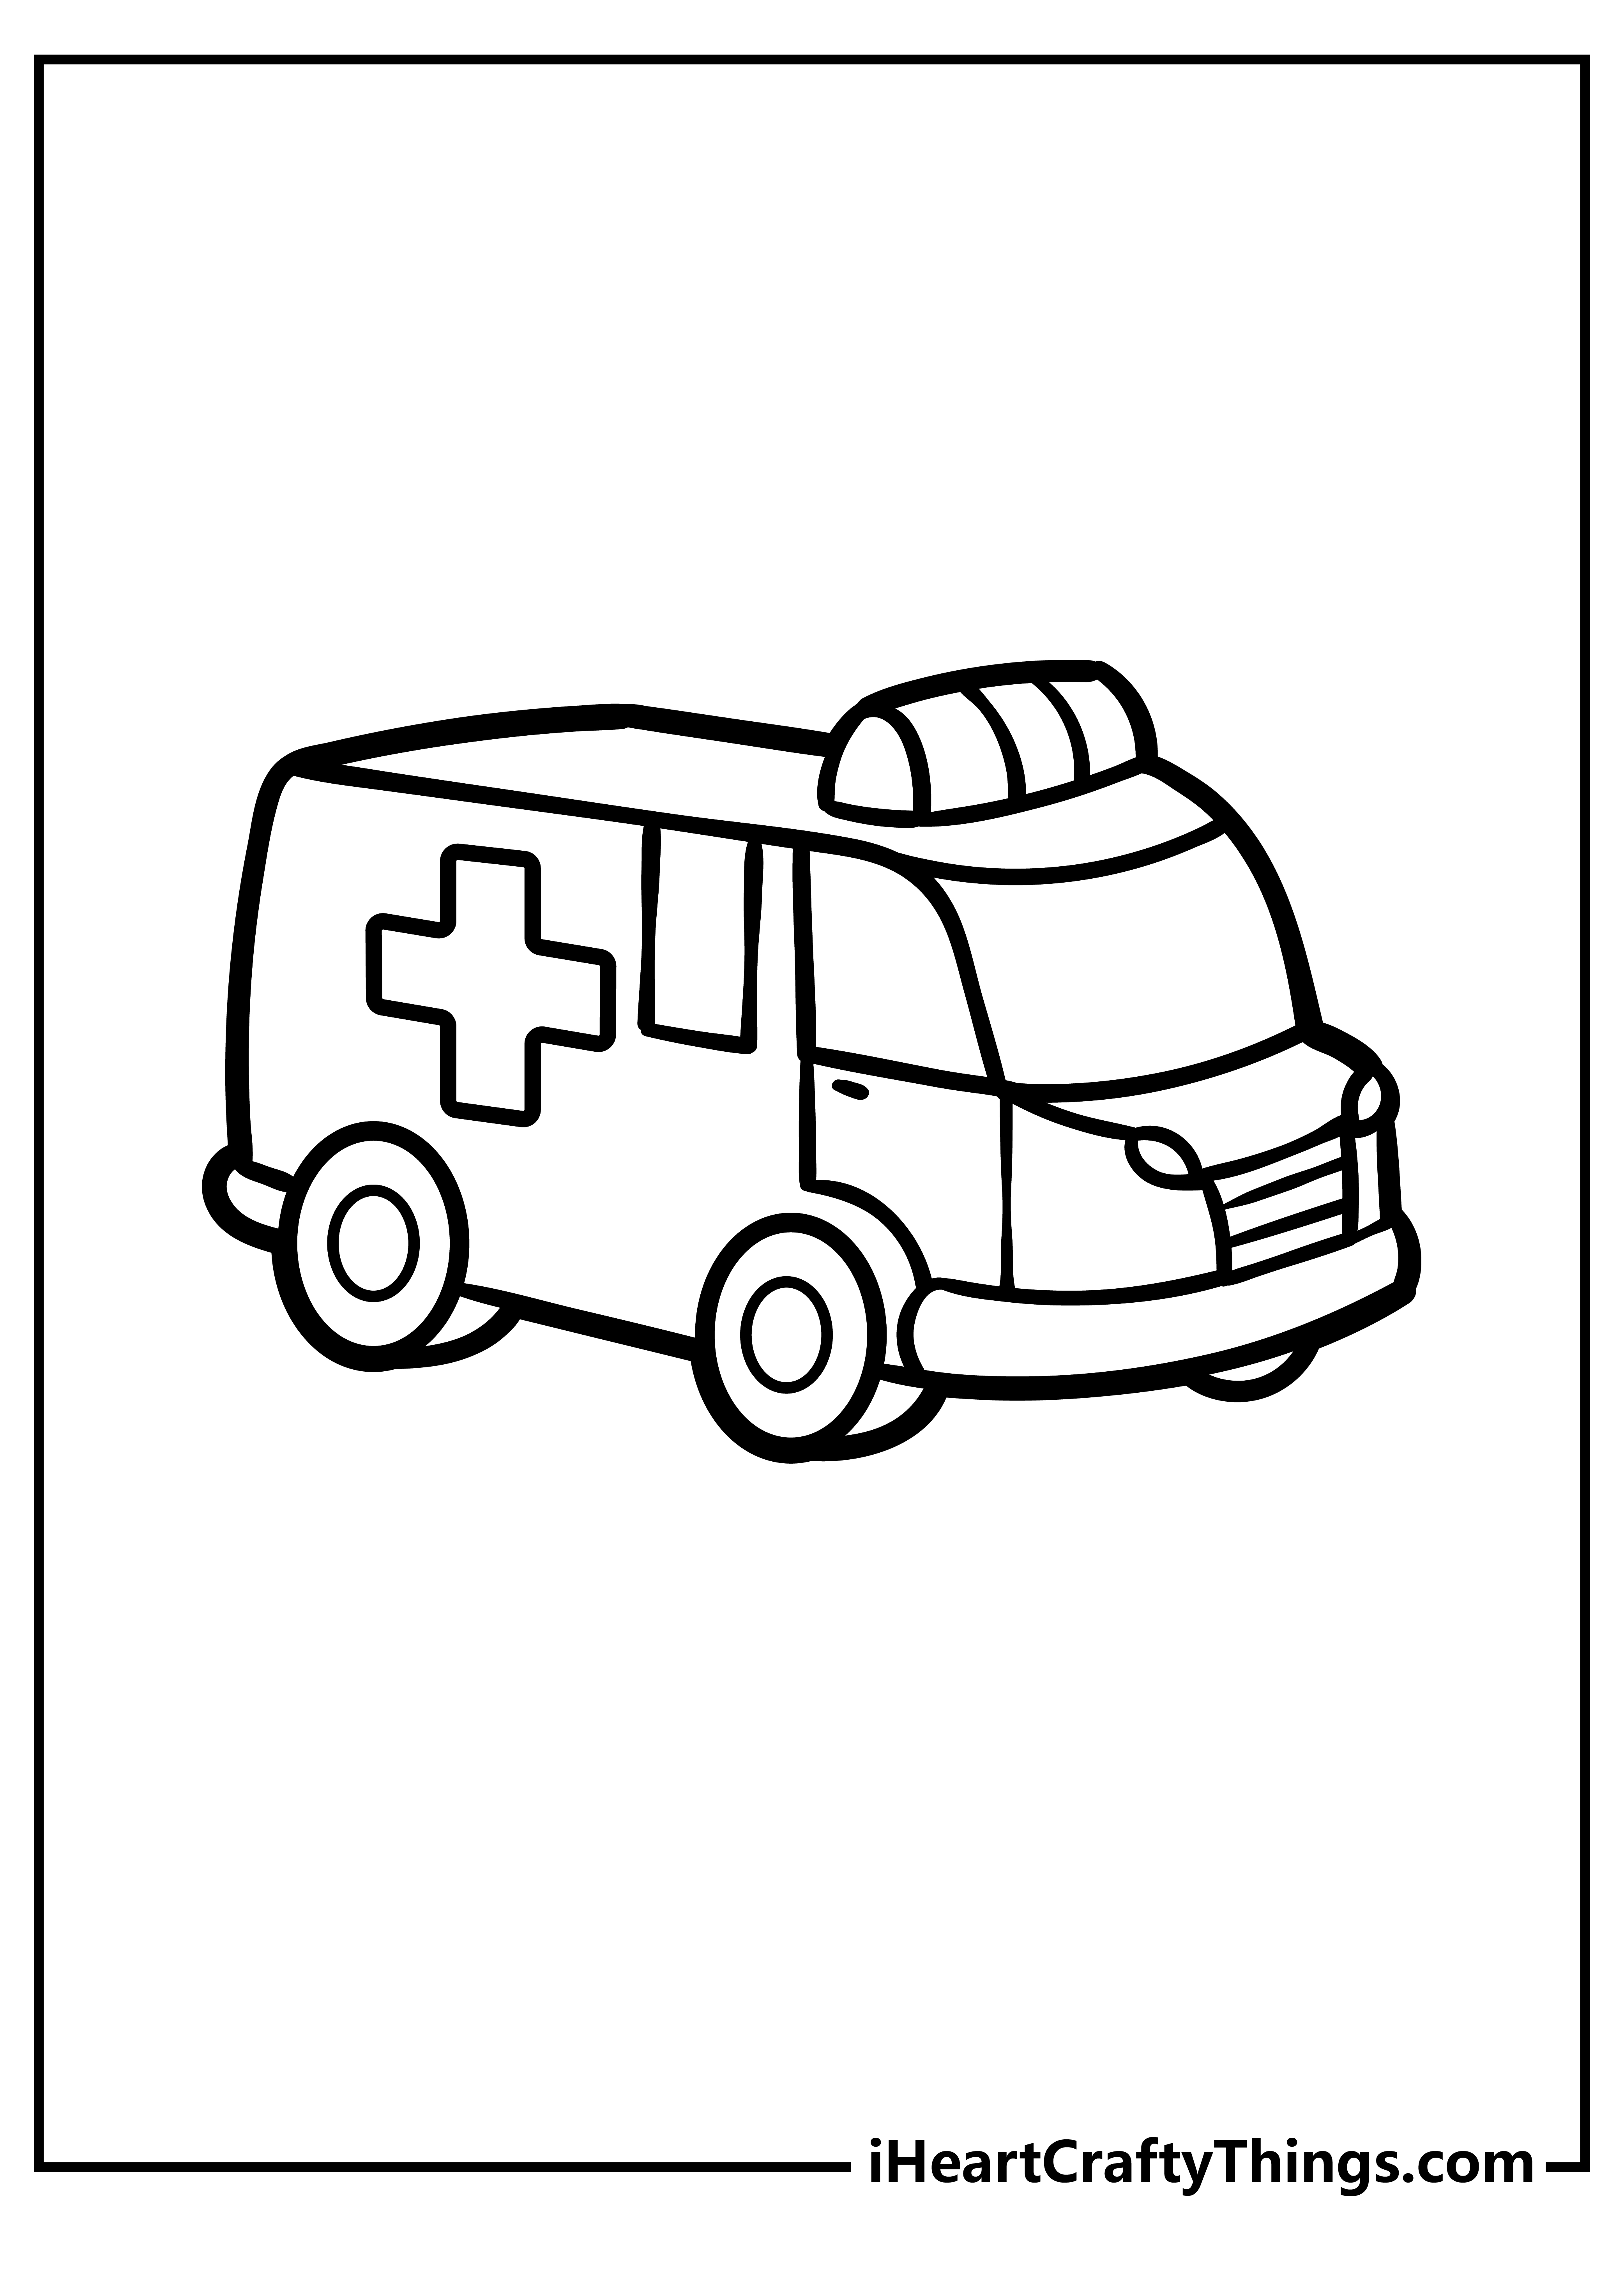 Ambulance Easy Coloring Pages